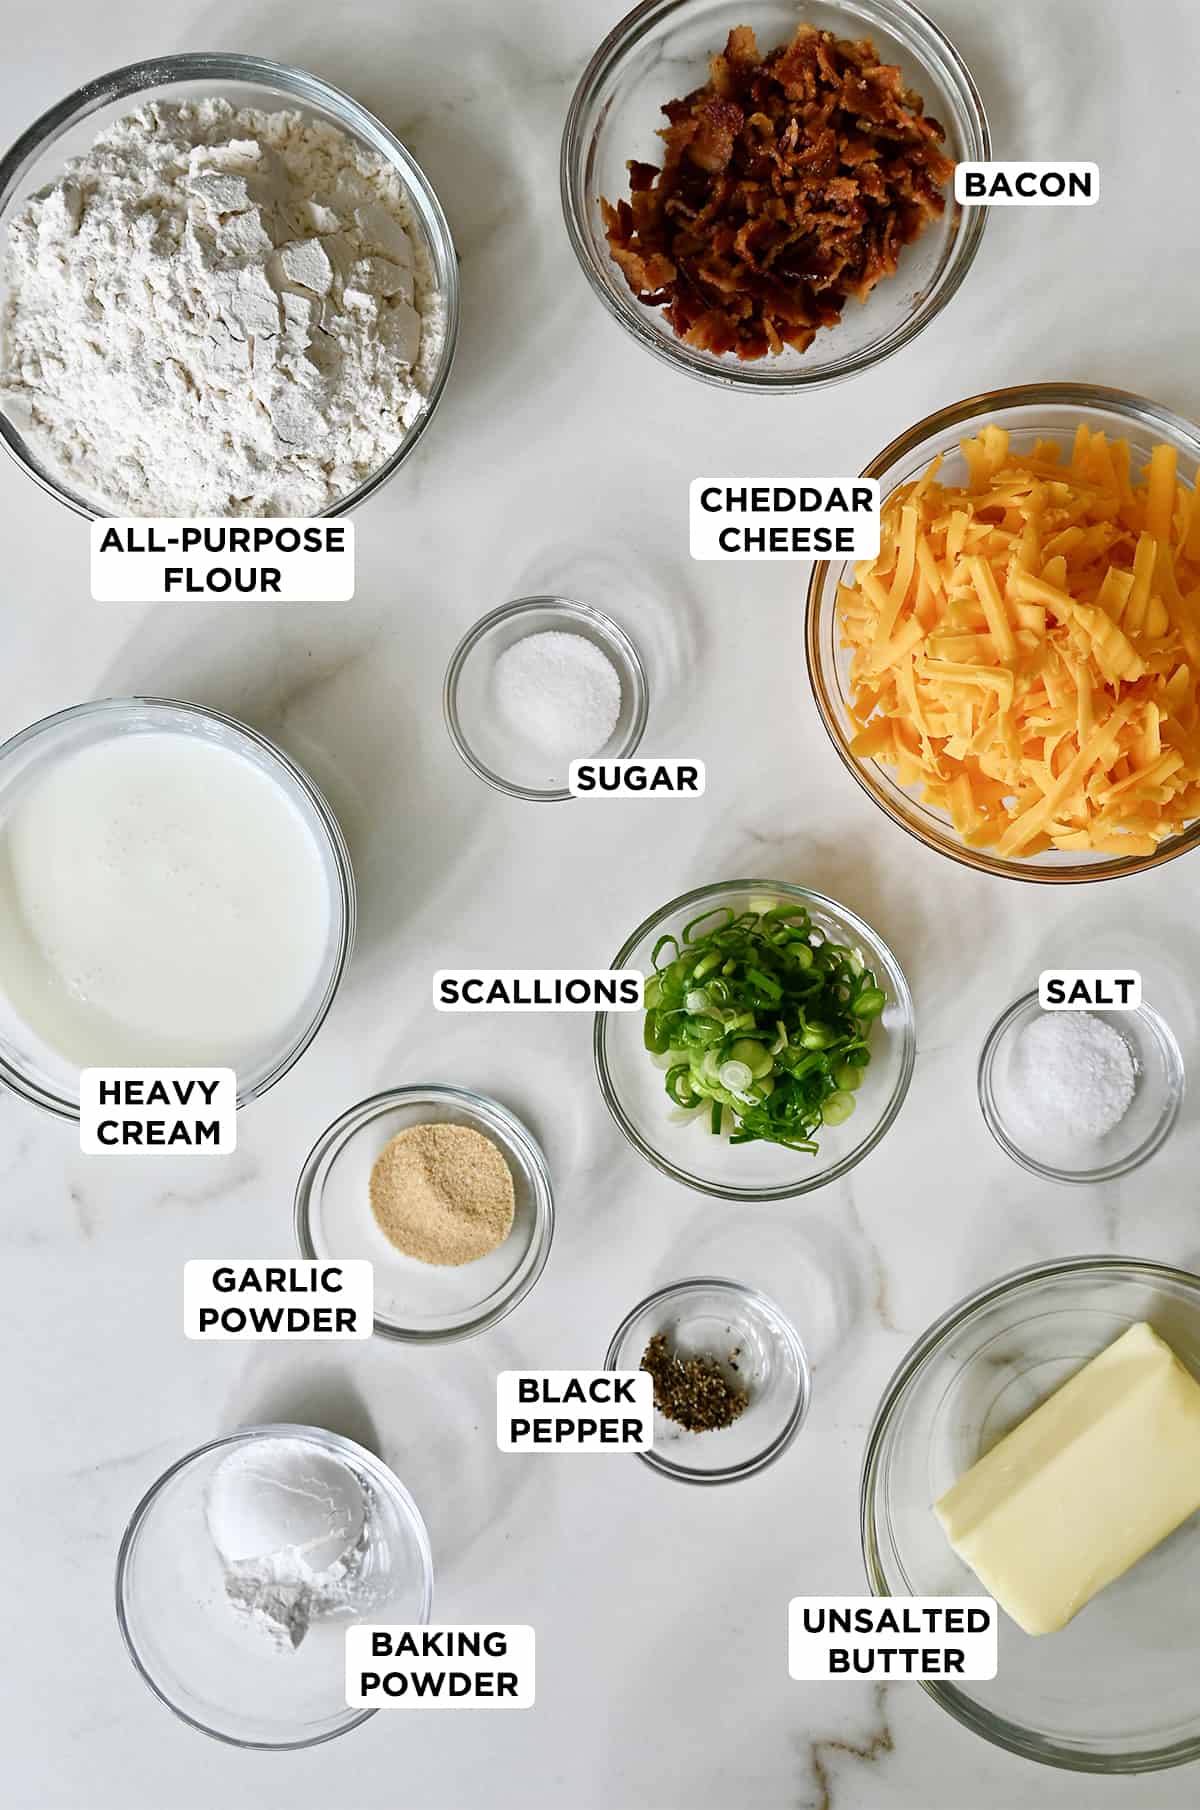 Various sizes of glass bowls containing flour, crispy bacon crumbles, shredded cheddar cheese, sugar, sliced scallions, salt, heavy cream, black pepper, butter and bacon powder.